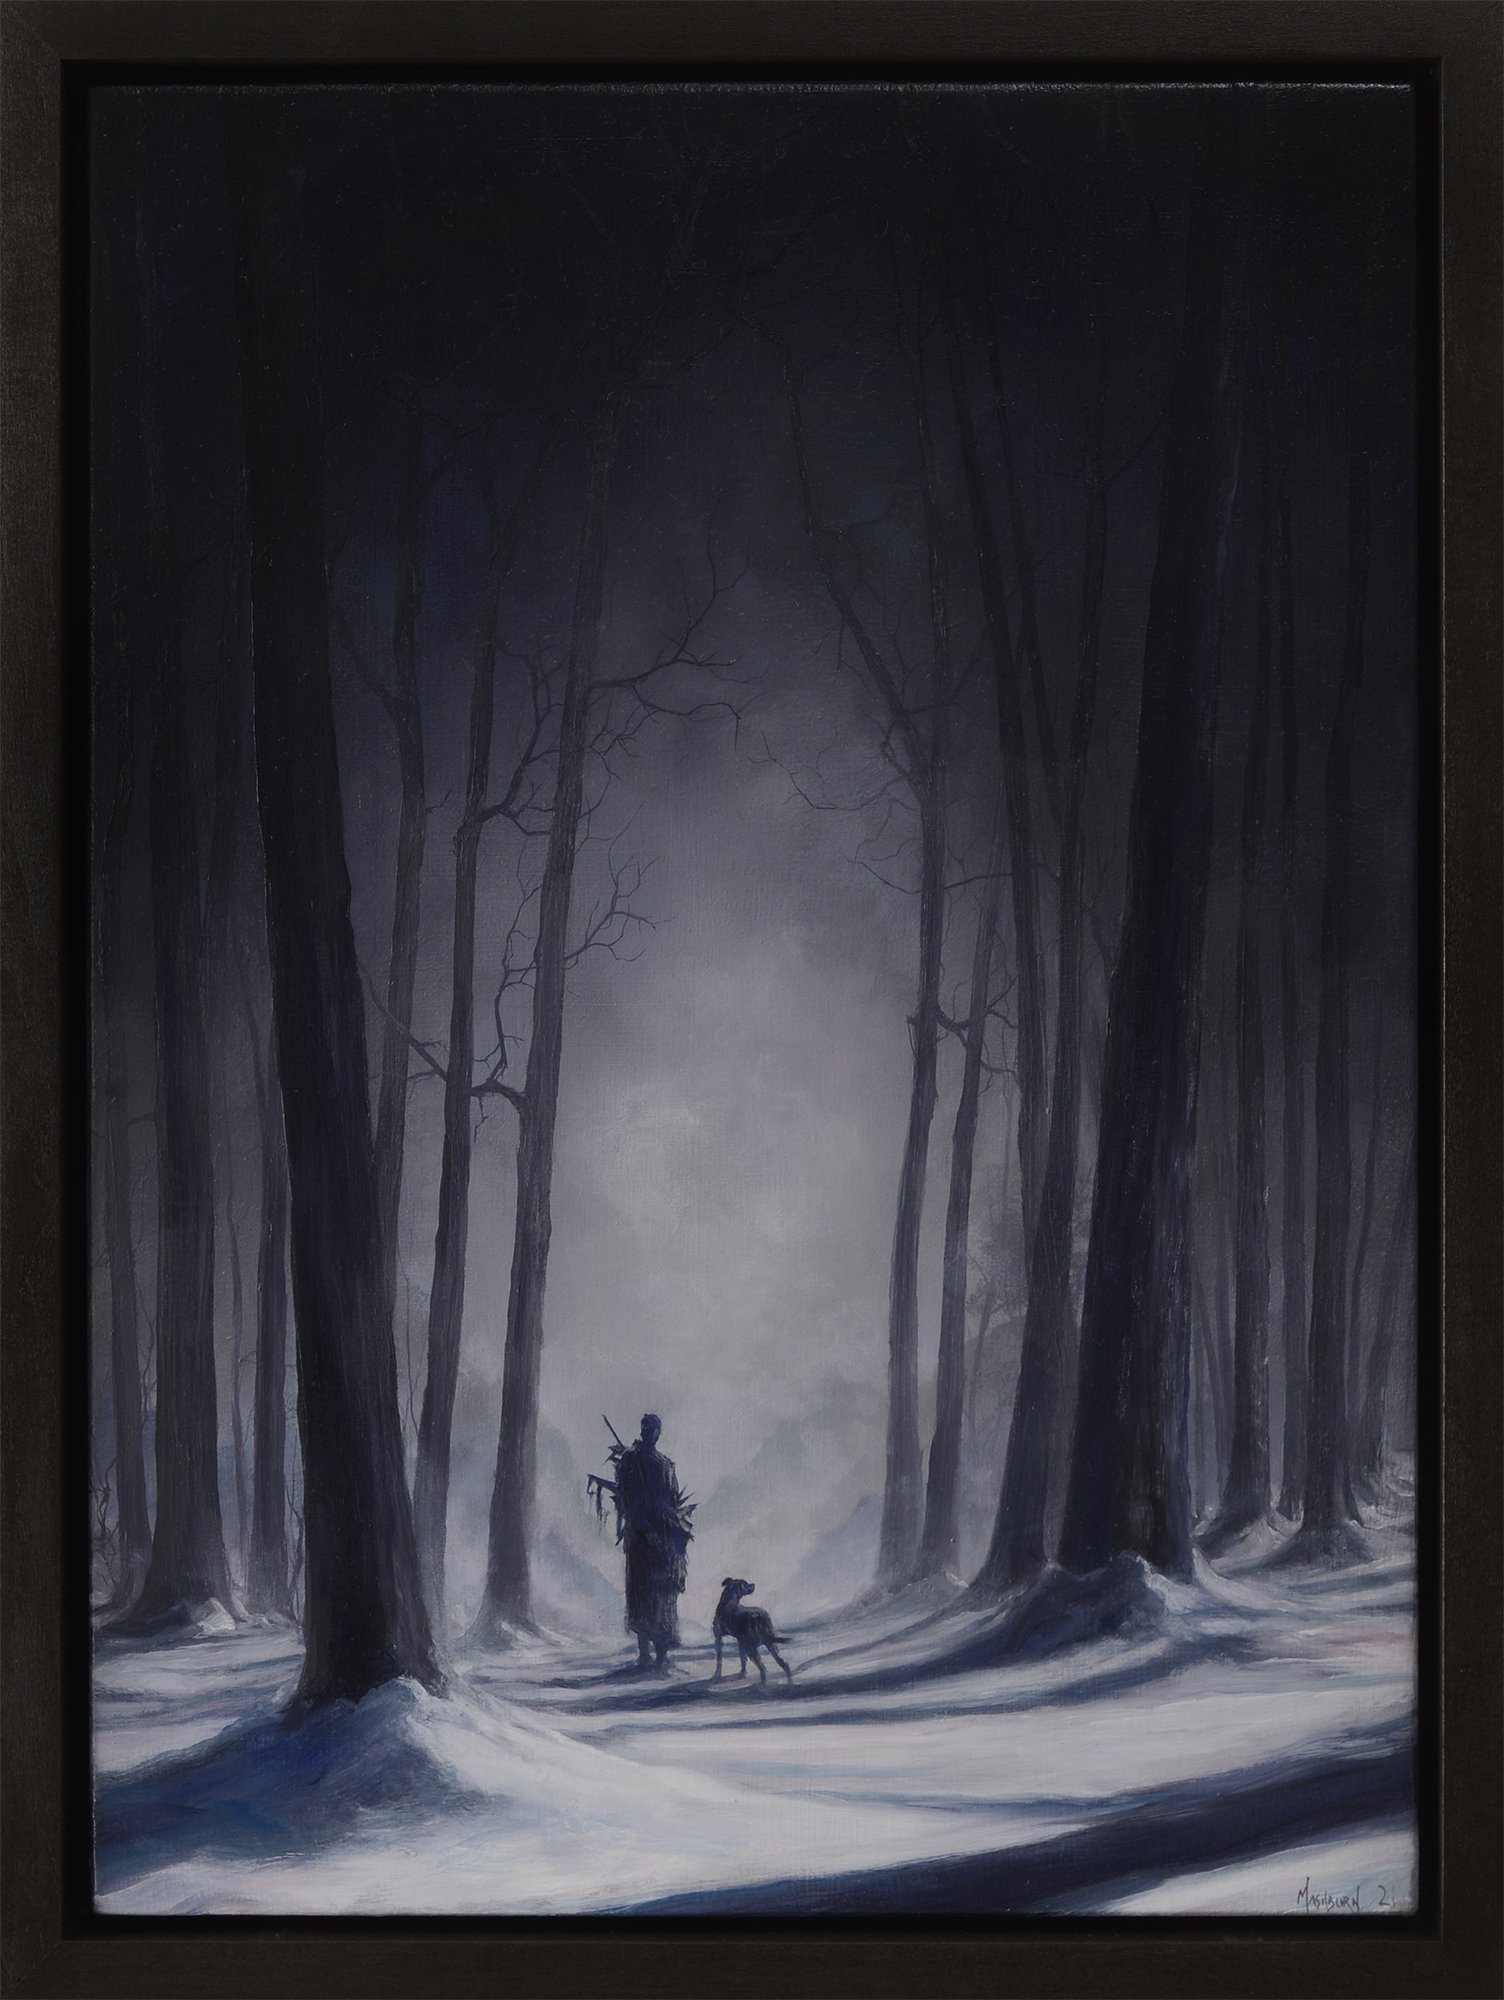 Boy with Dog in the Forest at Night